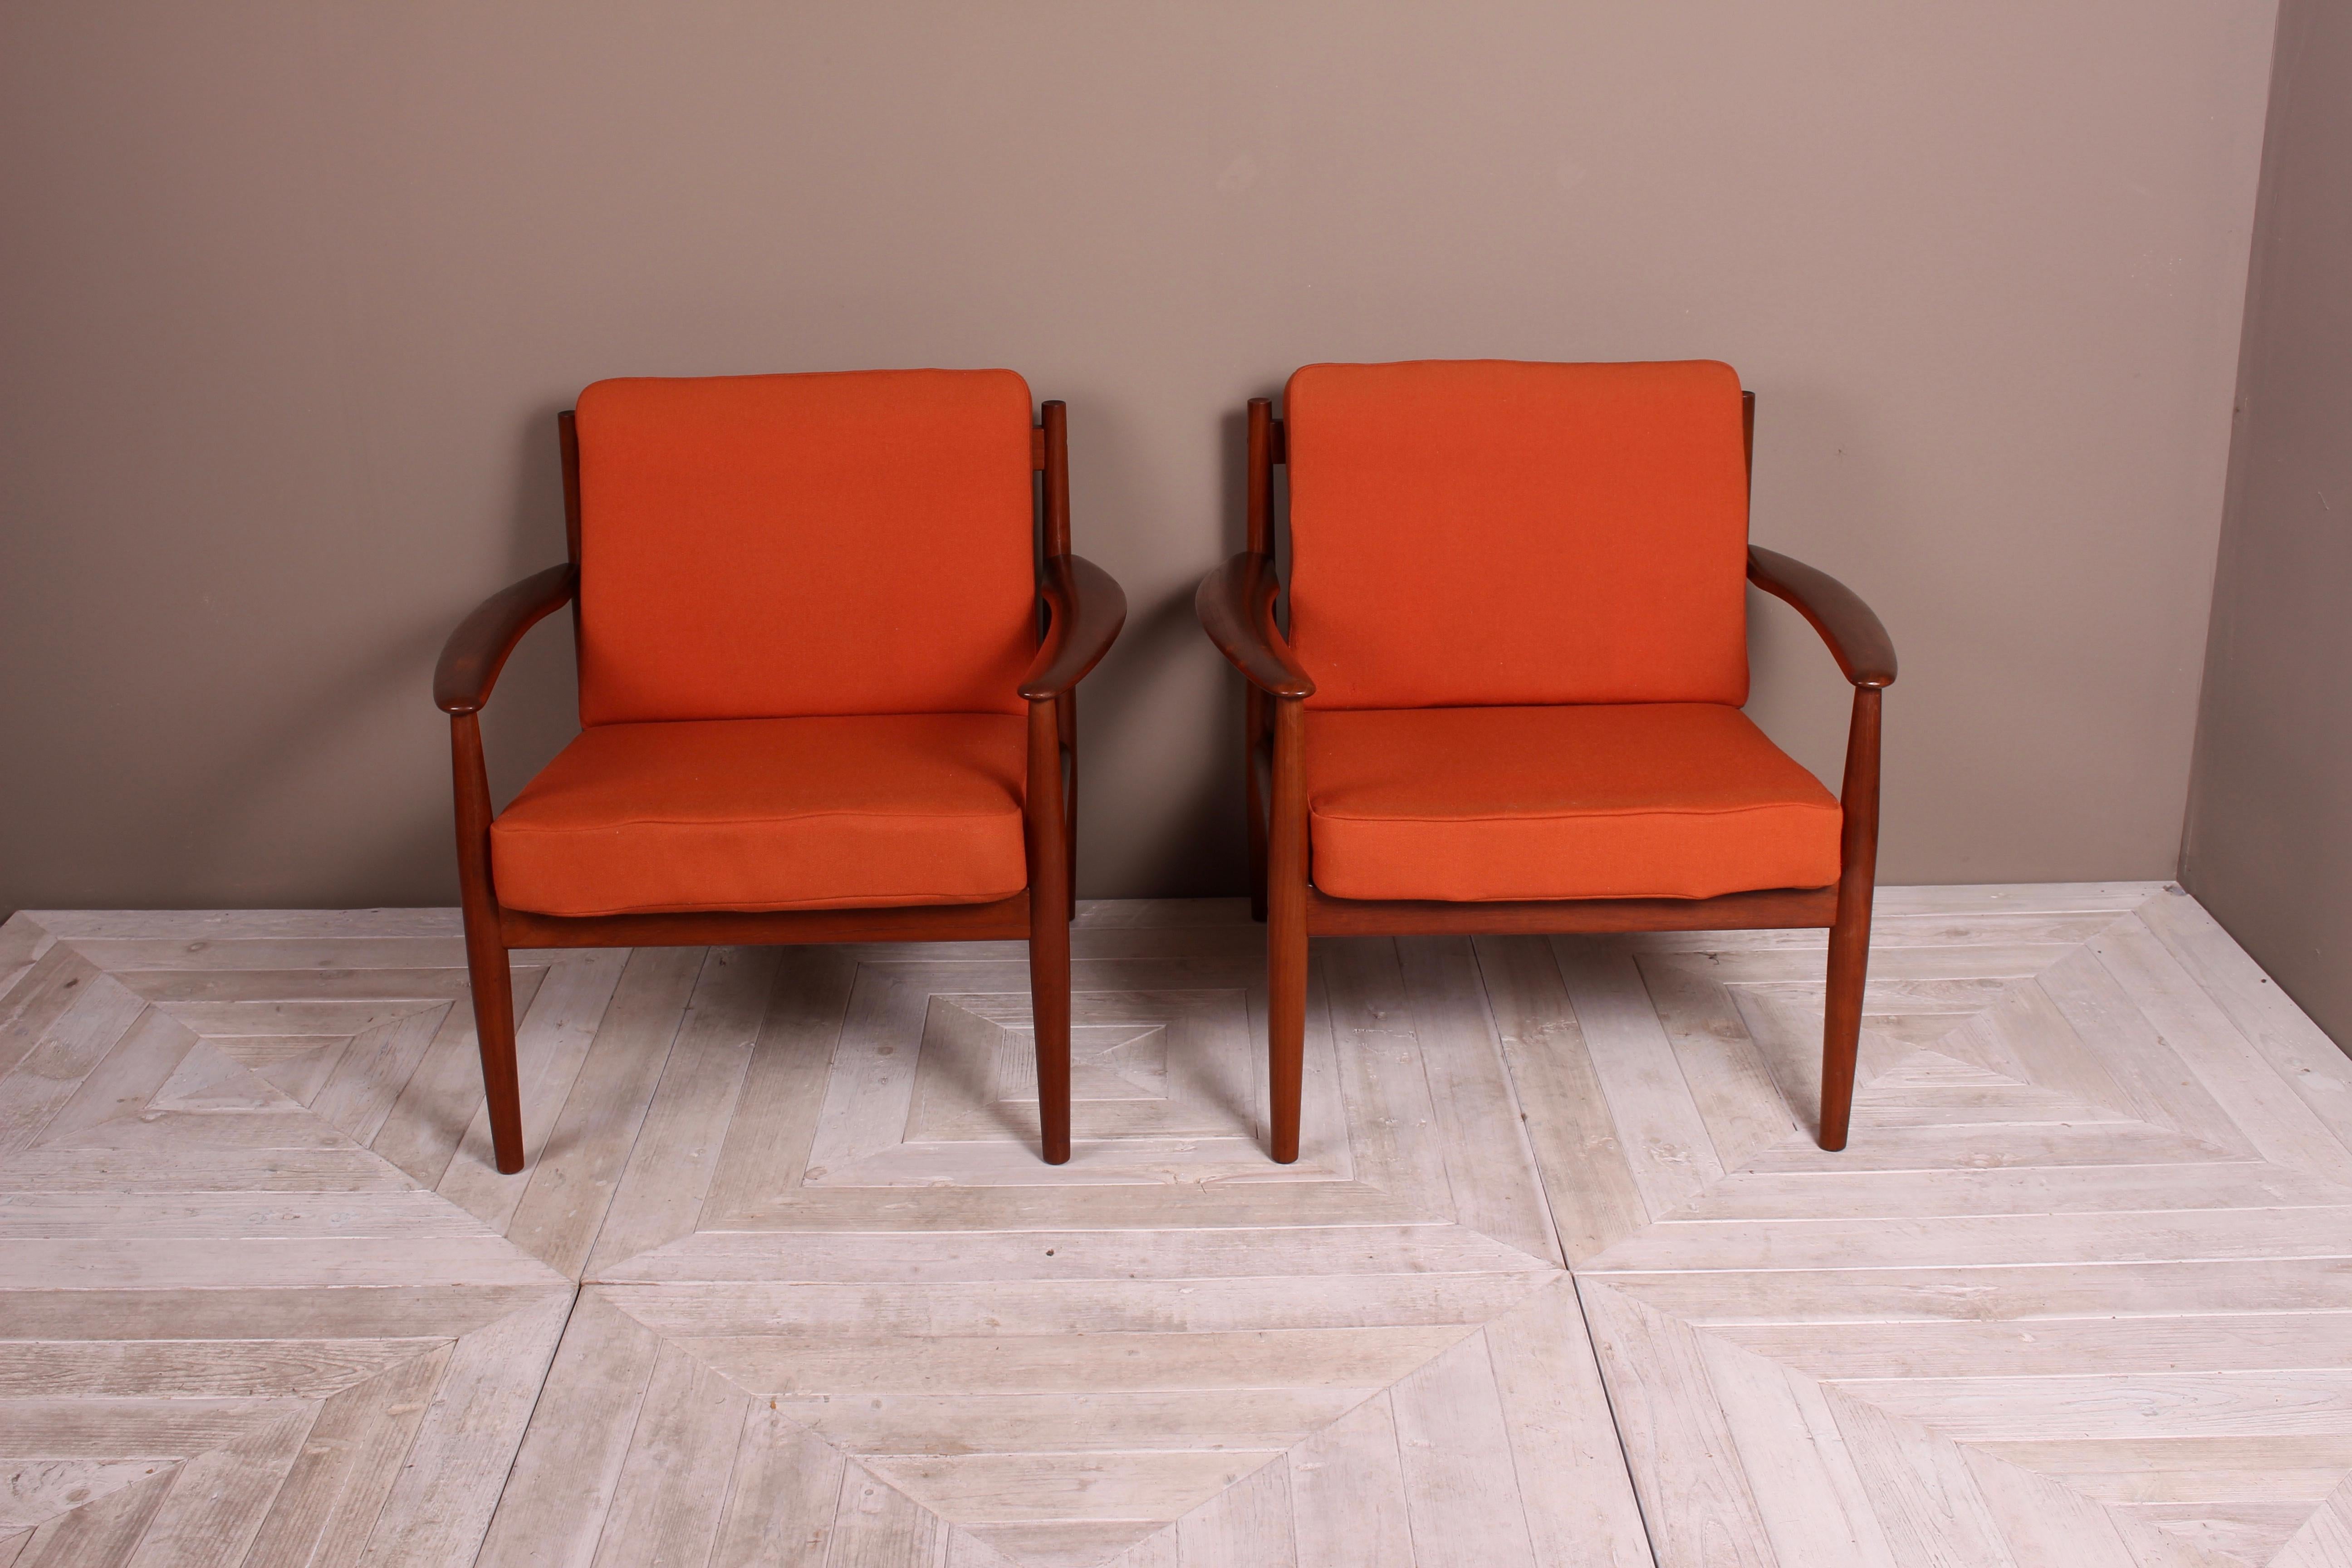 A beautiful pair of Danish teak lounge chairs by Grete Jalk for France & Son. The Danish modern design with original innerspring cushions and covered in a nice burnt orange fabric. Produced by France & Son, Denmark. We like to keep our items as